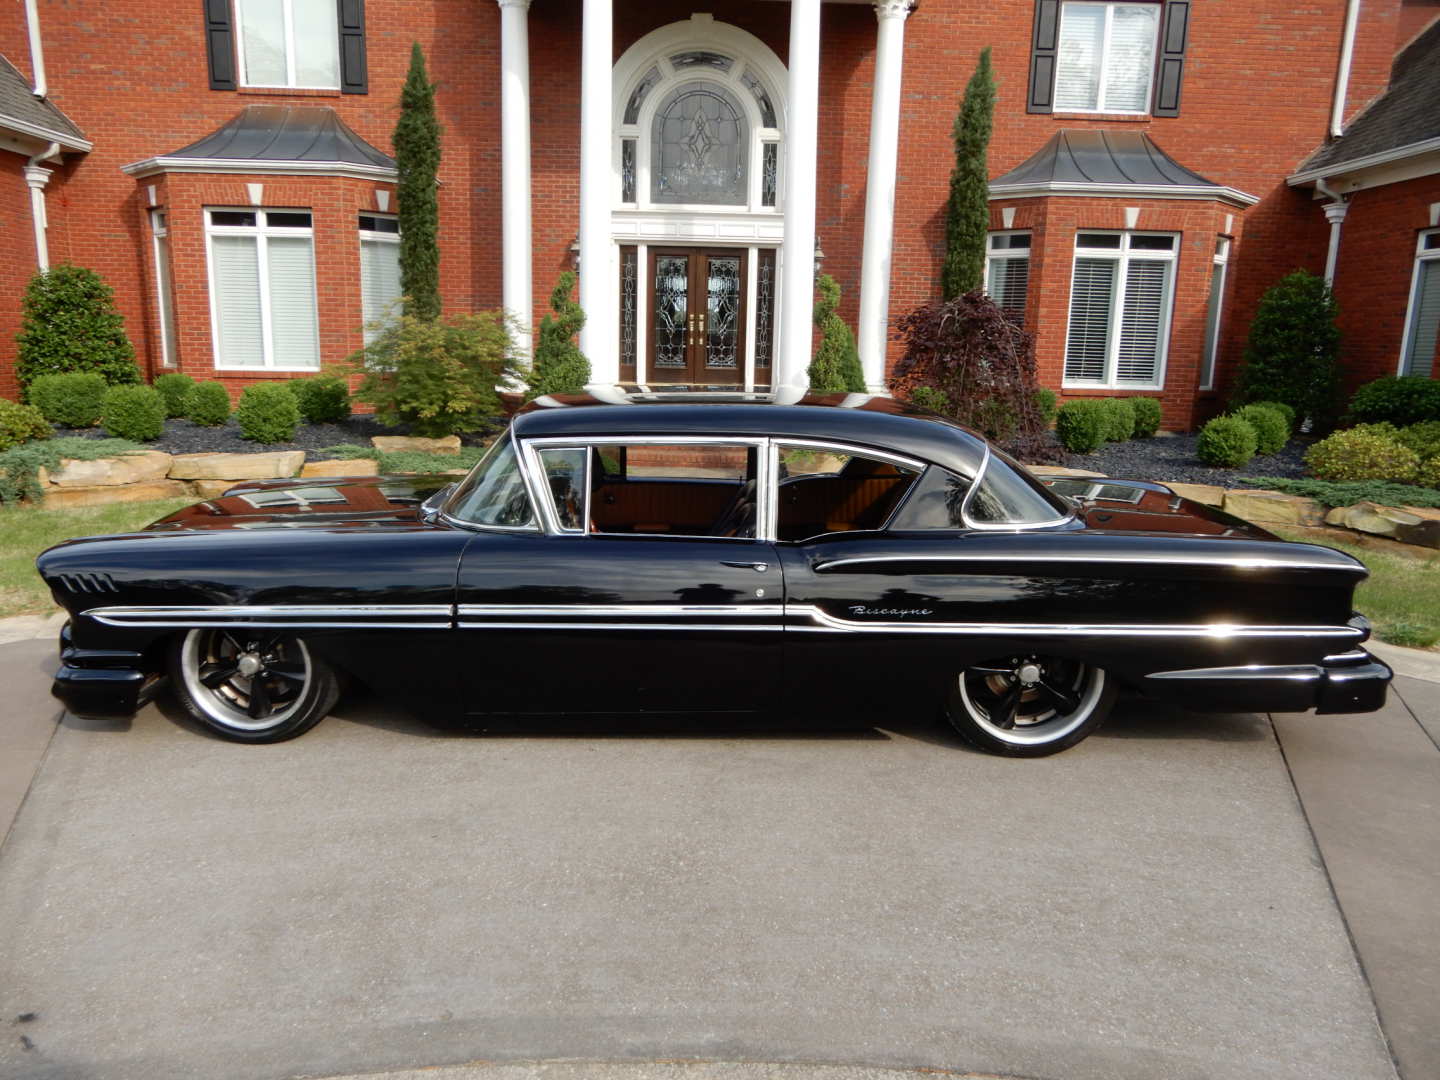 5th Image of a 1958 CHEVROLET IMPALA